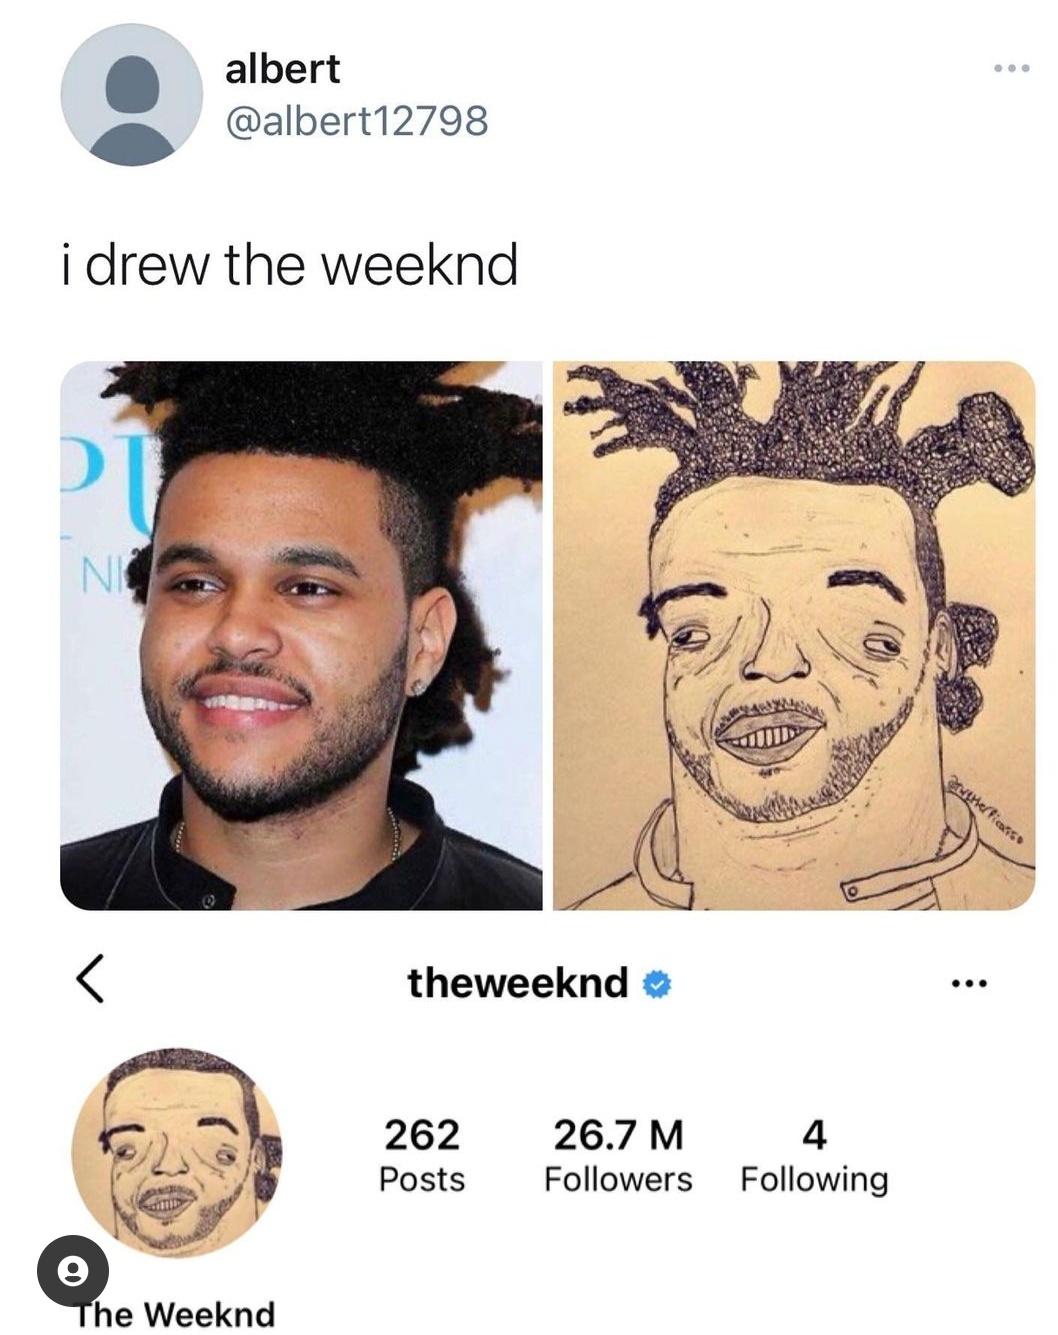 Before the Weeknd Vs after the Weeknd.